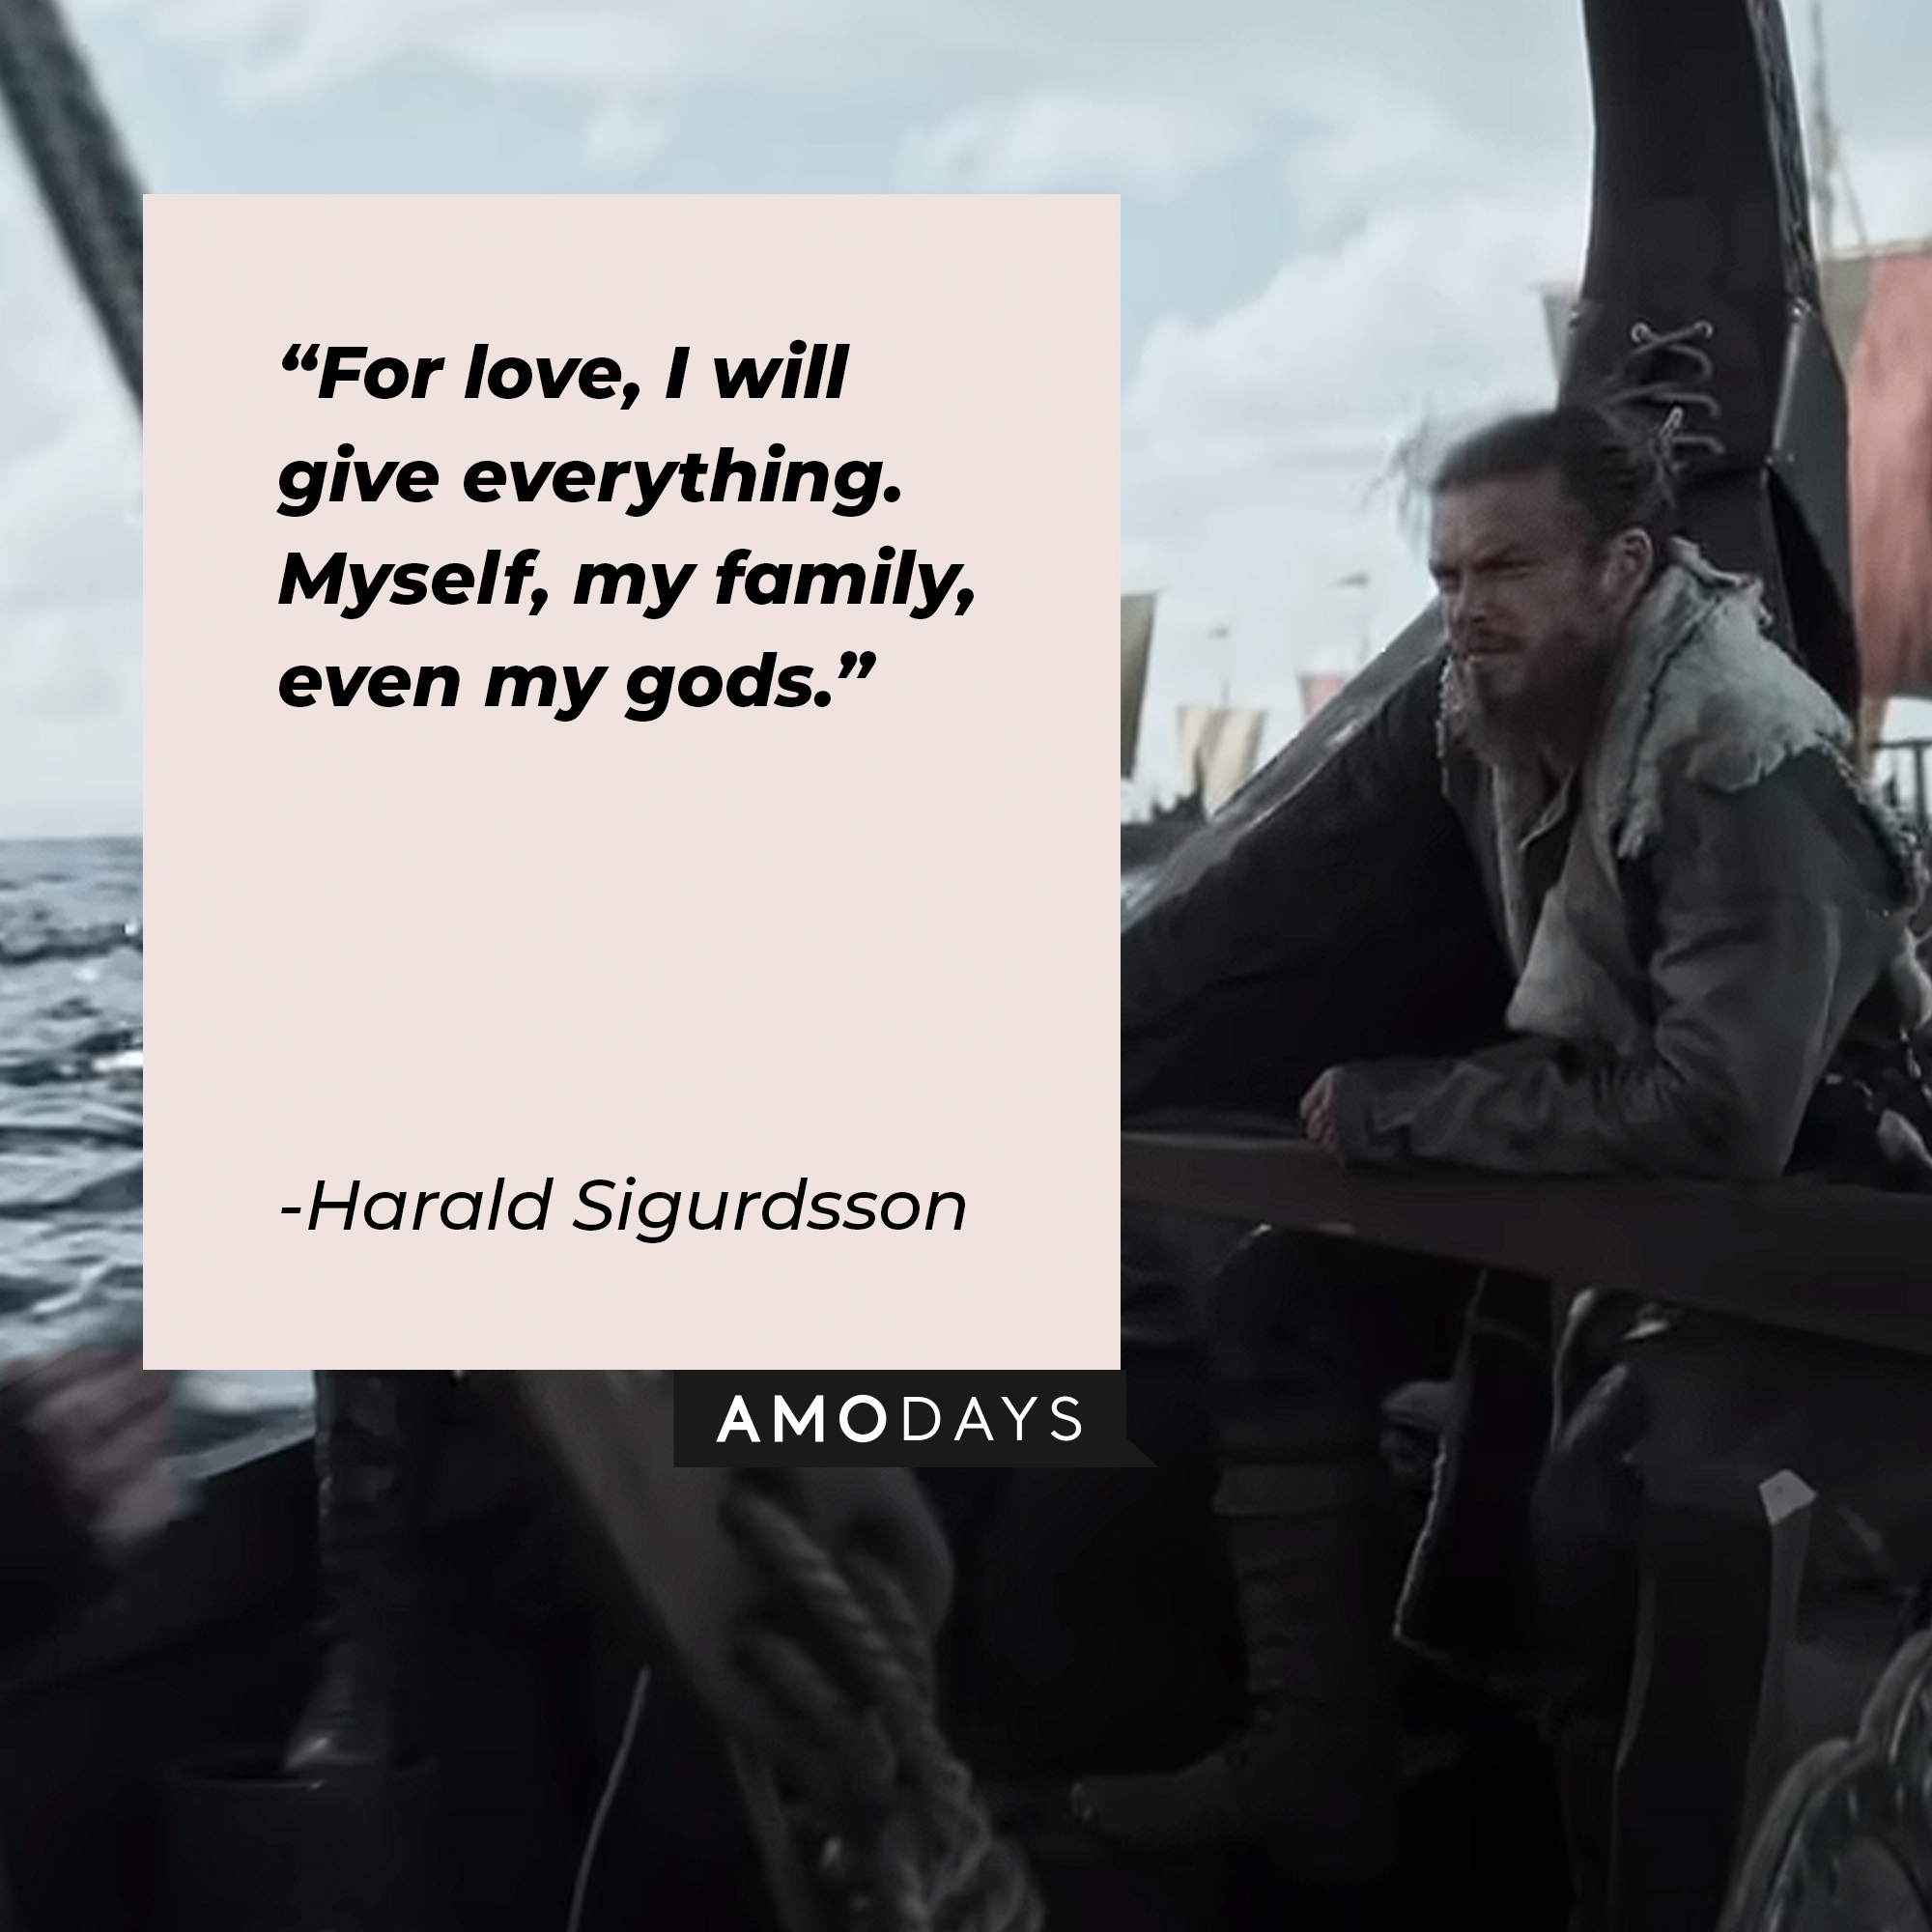 Harald Sigurdsson's quote: "For love, I will give everything. Myself, my family, even my gods." | Image: youtube.com/Netflix